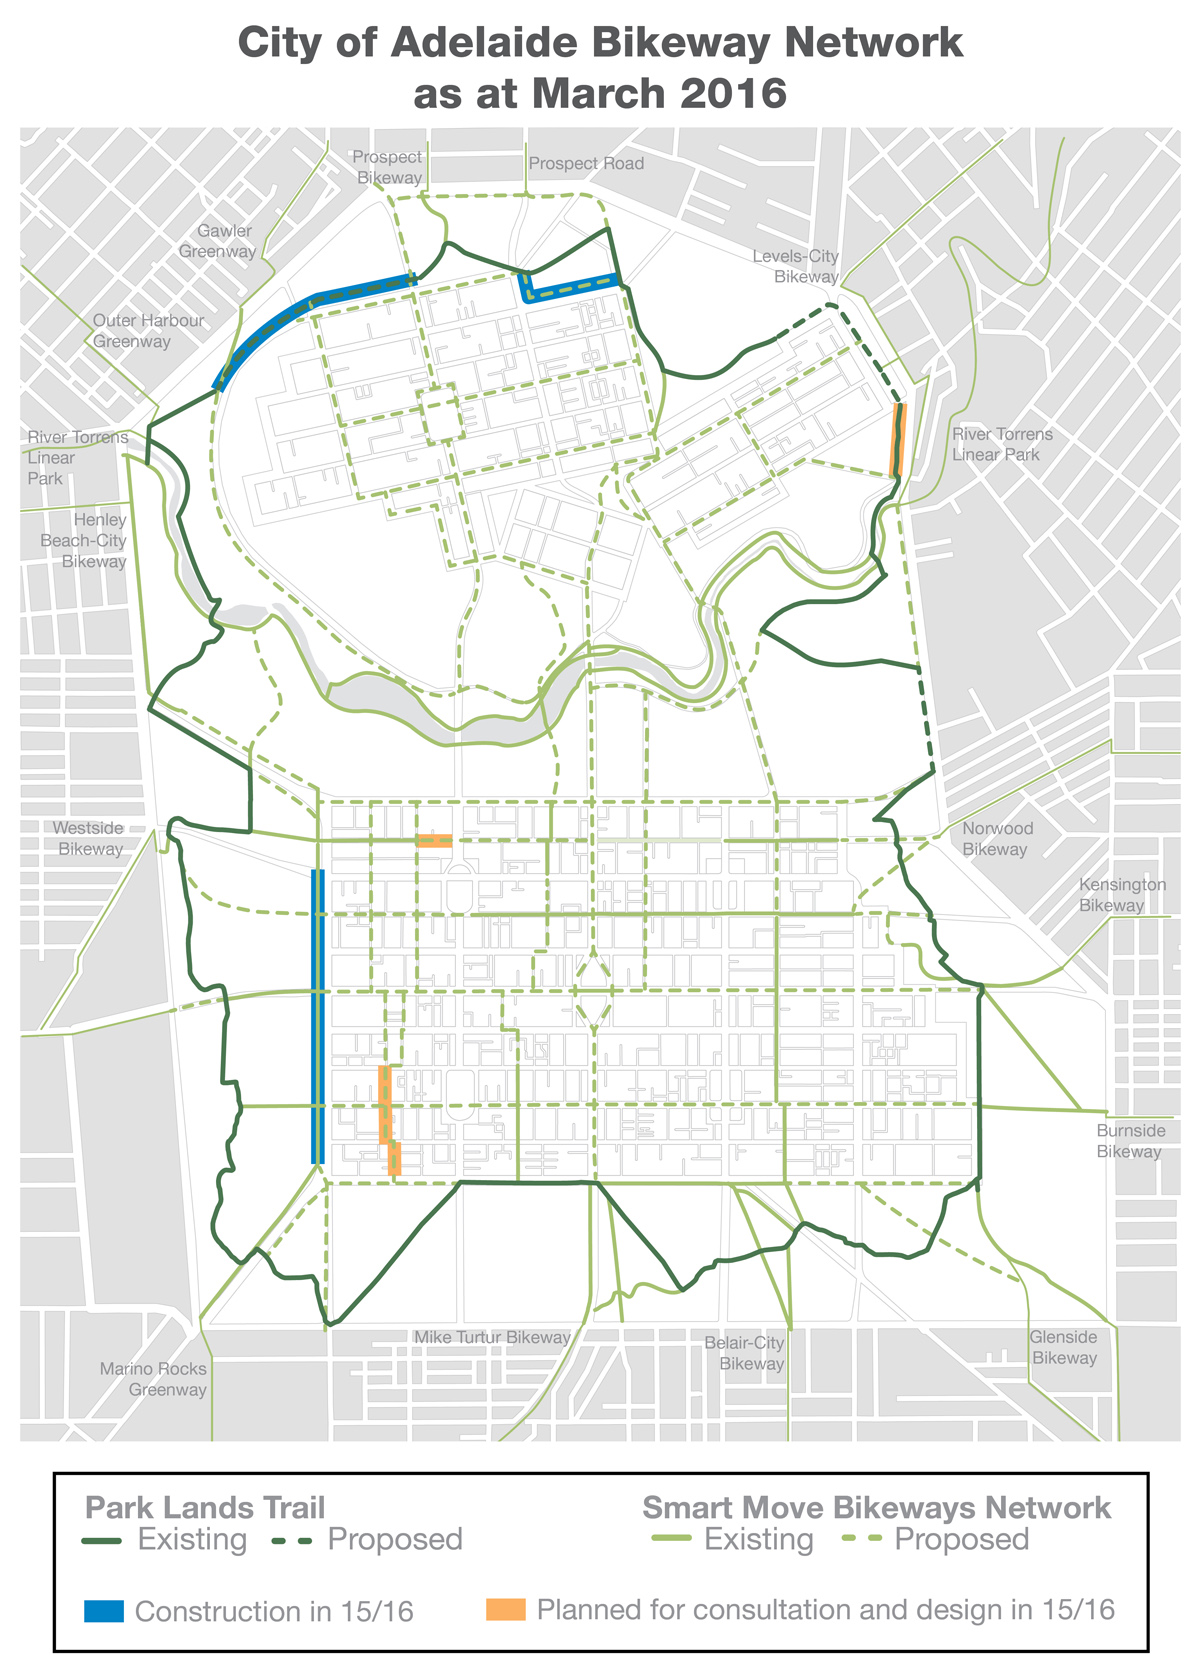 The bike lanes network planned in the city council's Smart Move strategy.